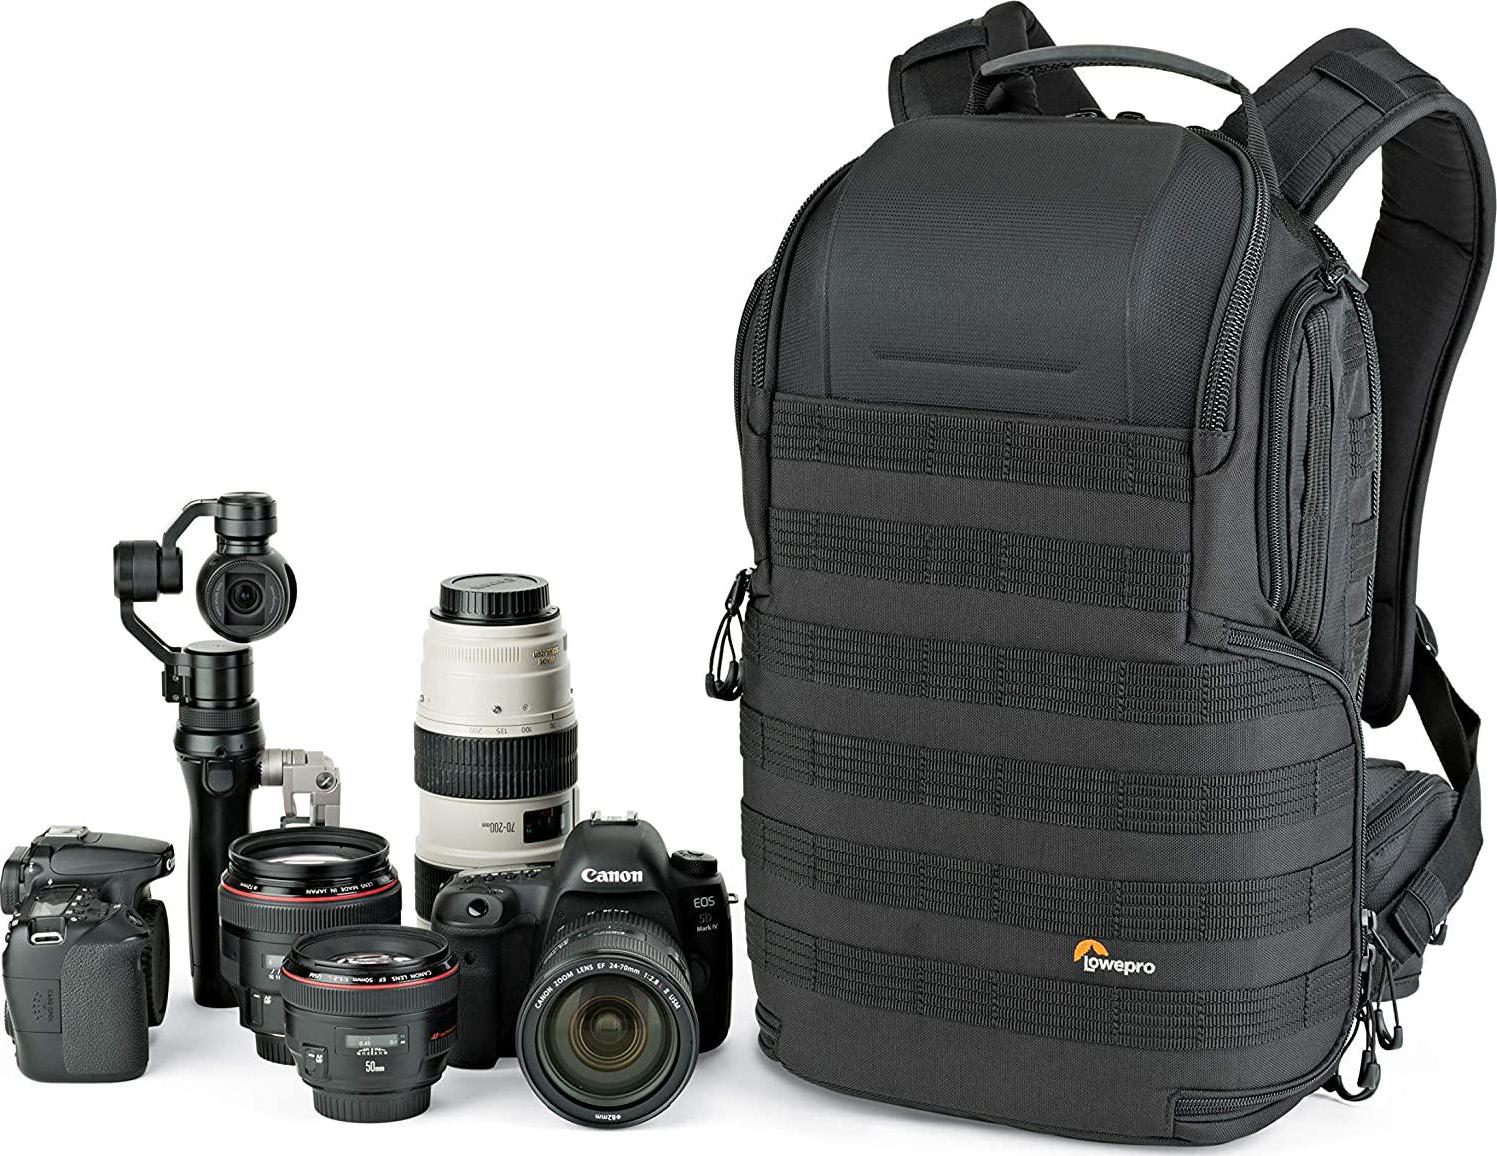 Lowepro, Lowepro ProTactic Modular Backpack with All Weather Cover, Camera Bag for Professional Use